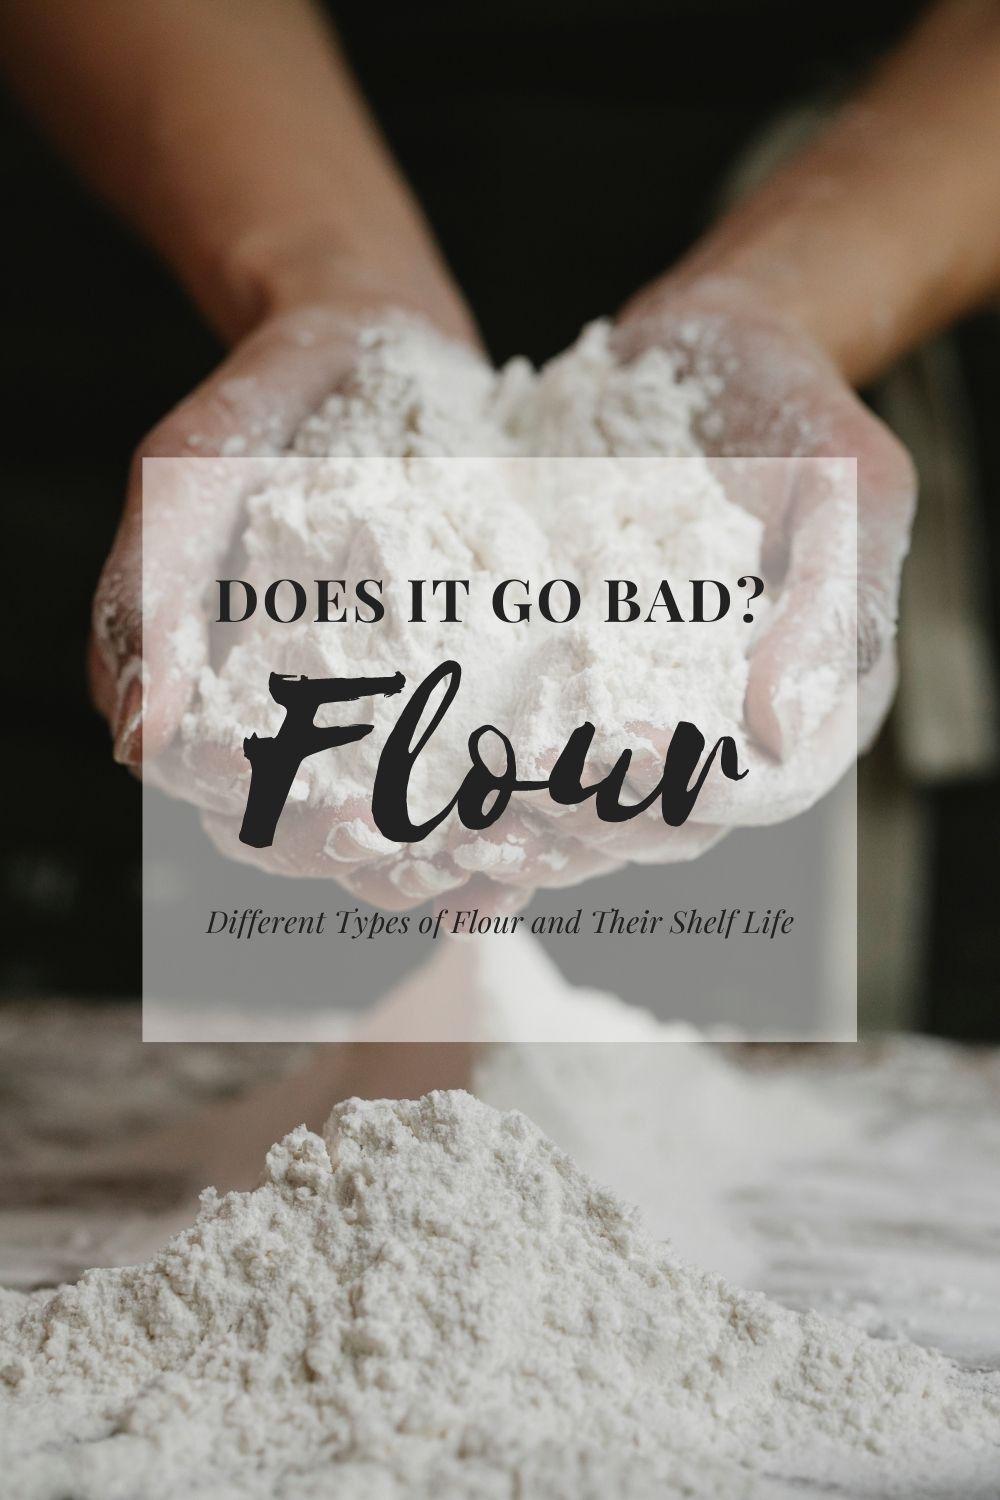 Does Flour Go Bad? Different Types of Flour and Their Shelf Life